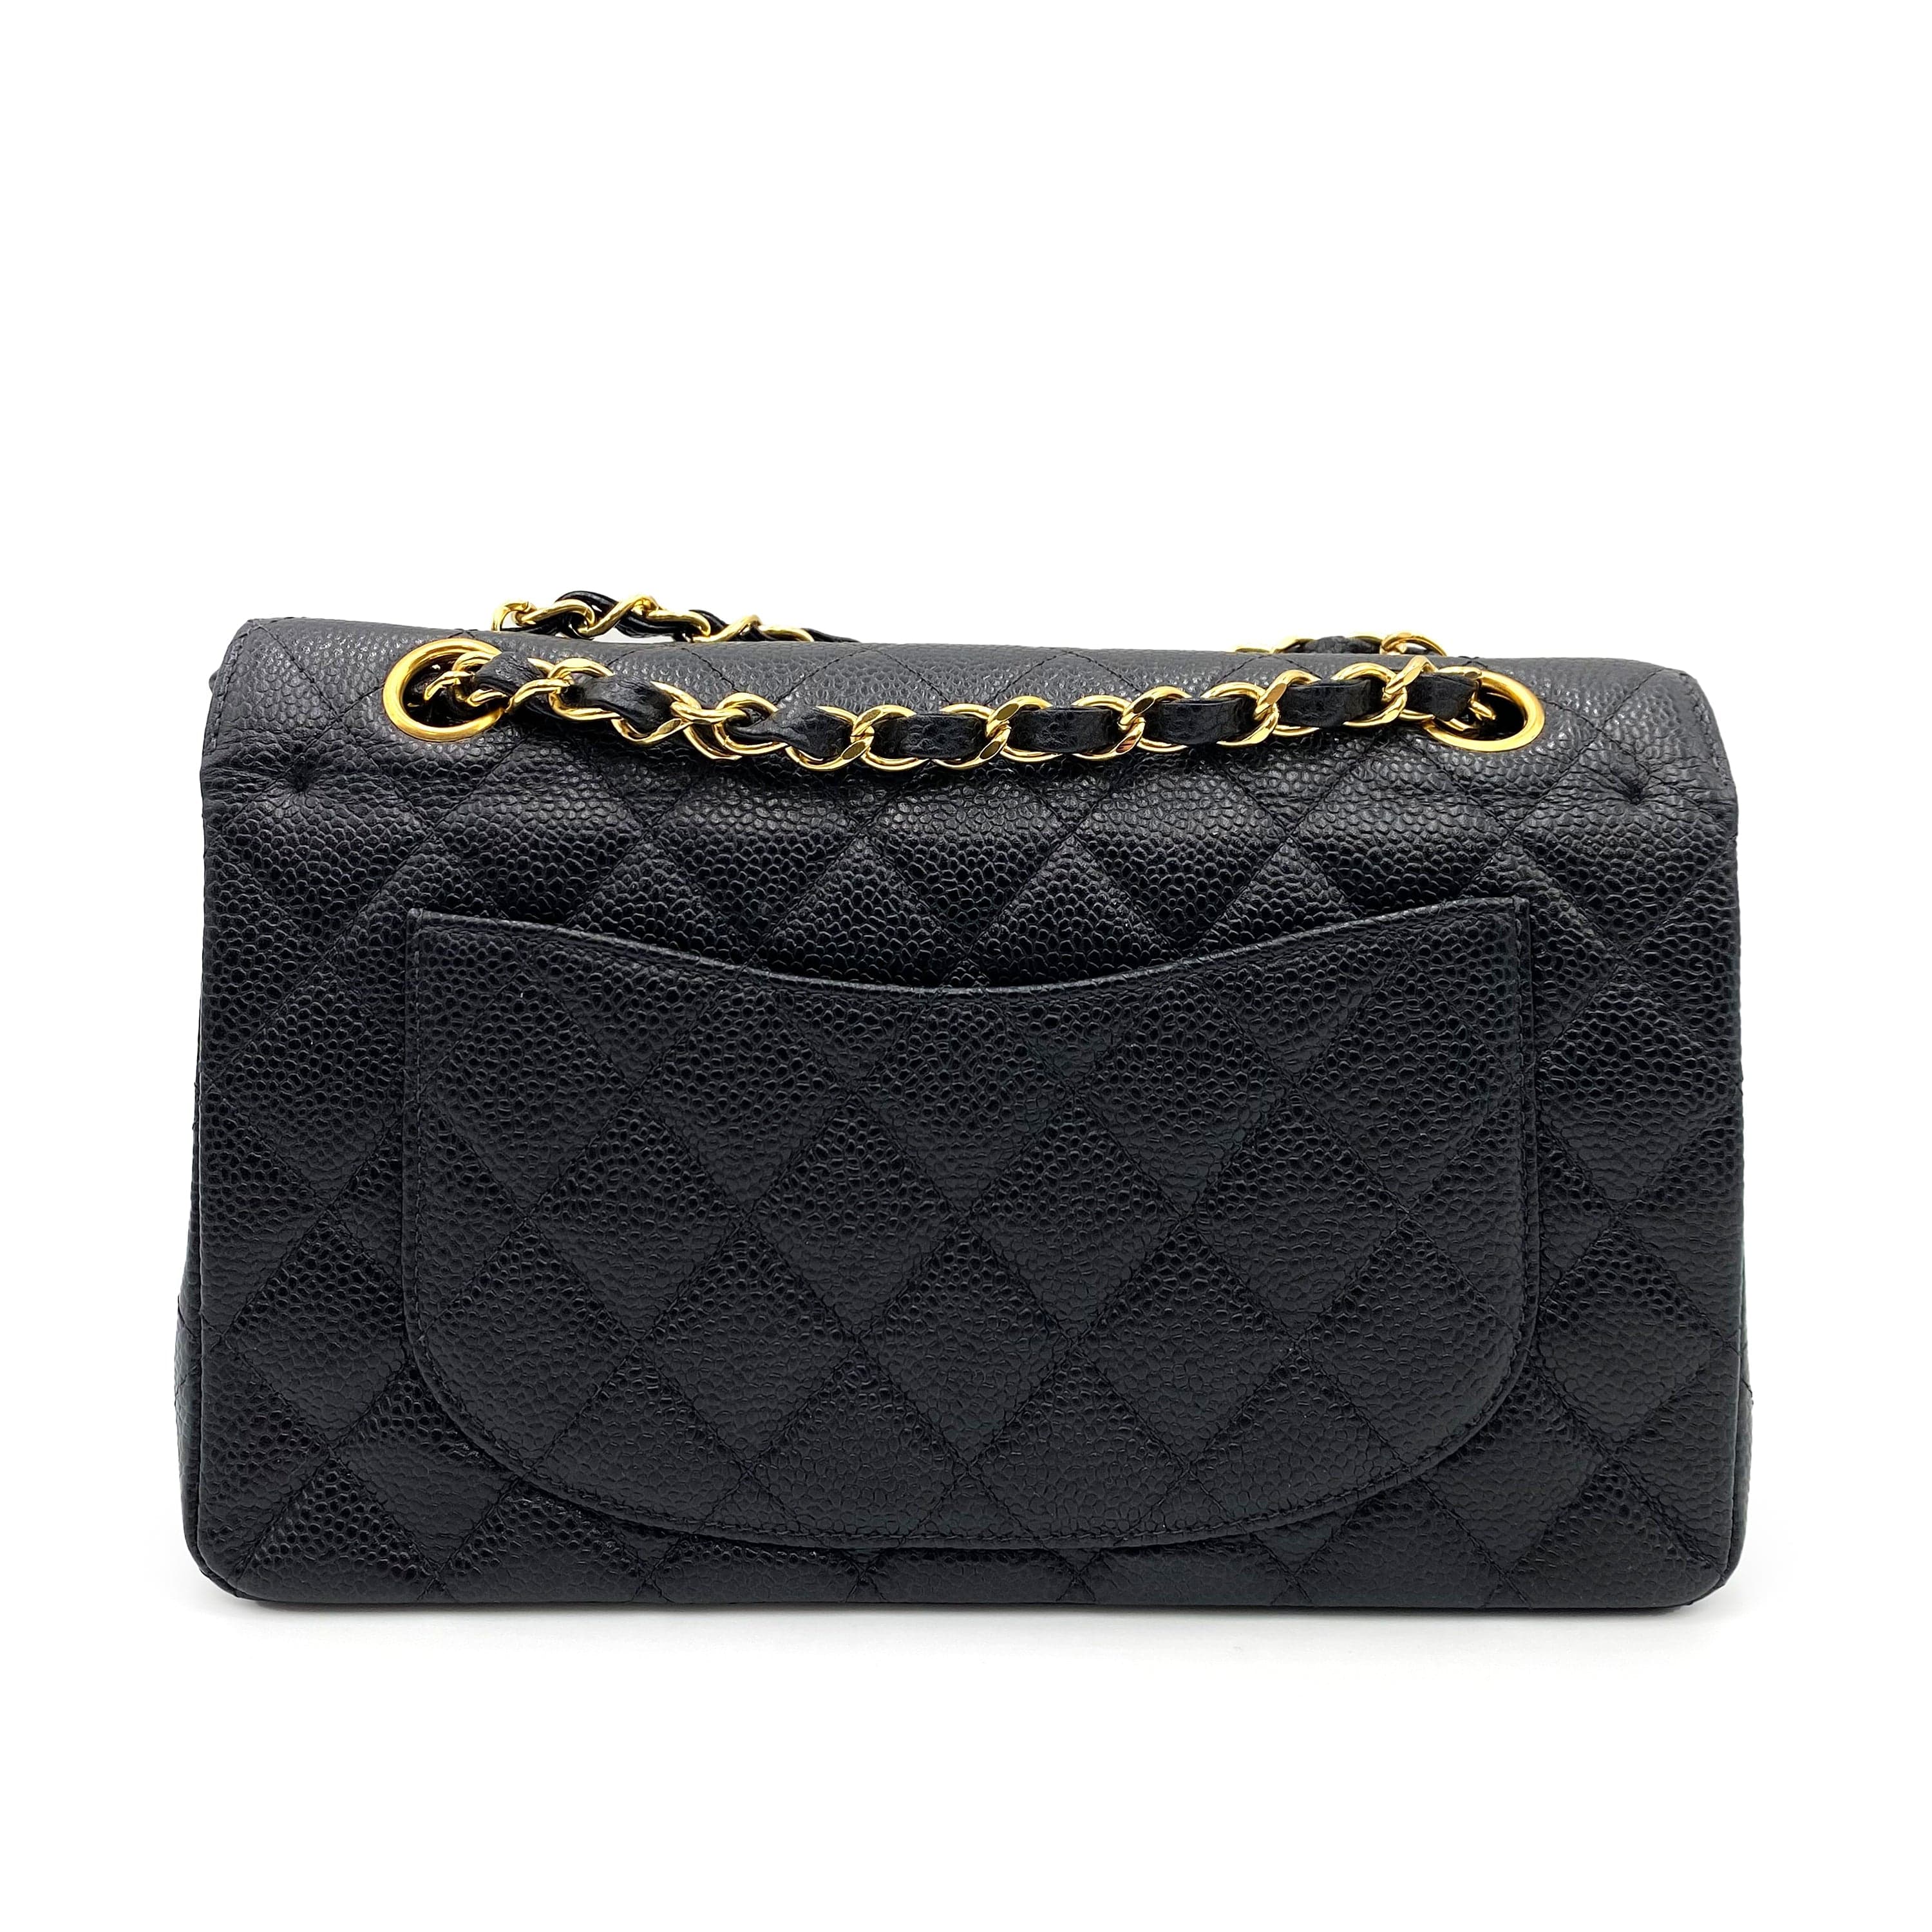 Luxury Promise CHANEL VINTAGE CLASSIC FLAP SMALL CHAIN SHOULDER BAG BLACK CAVIAR SKIN 90233723